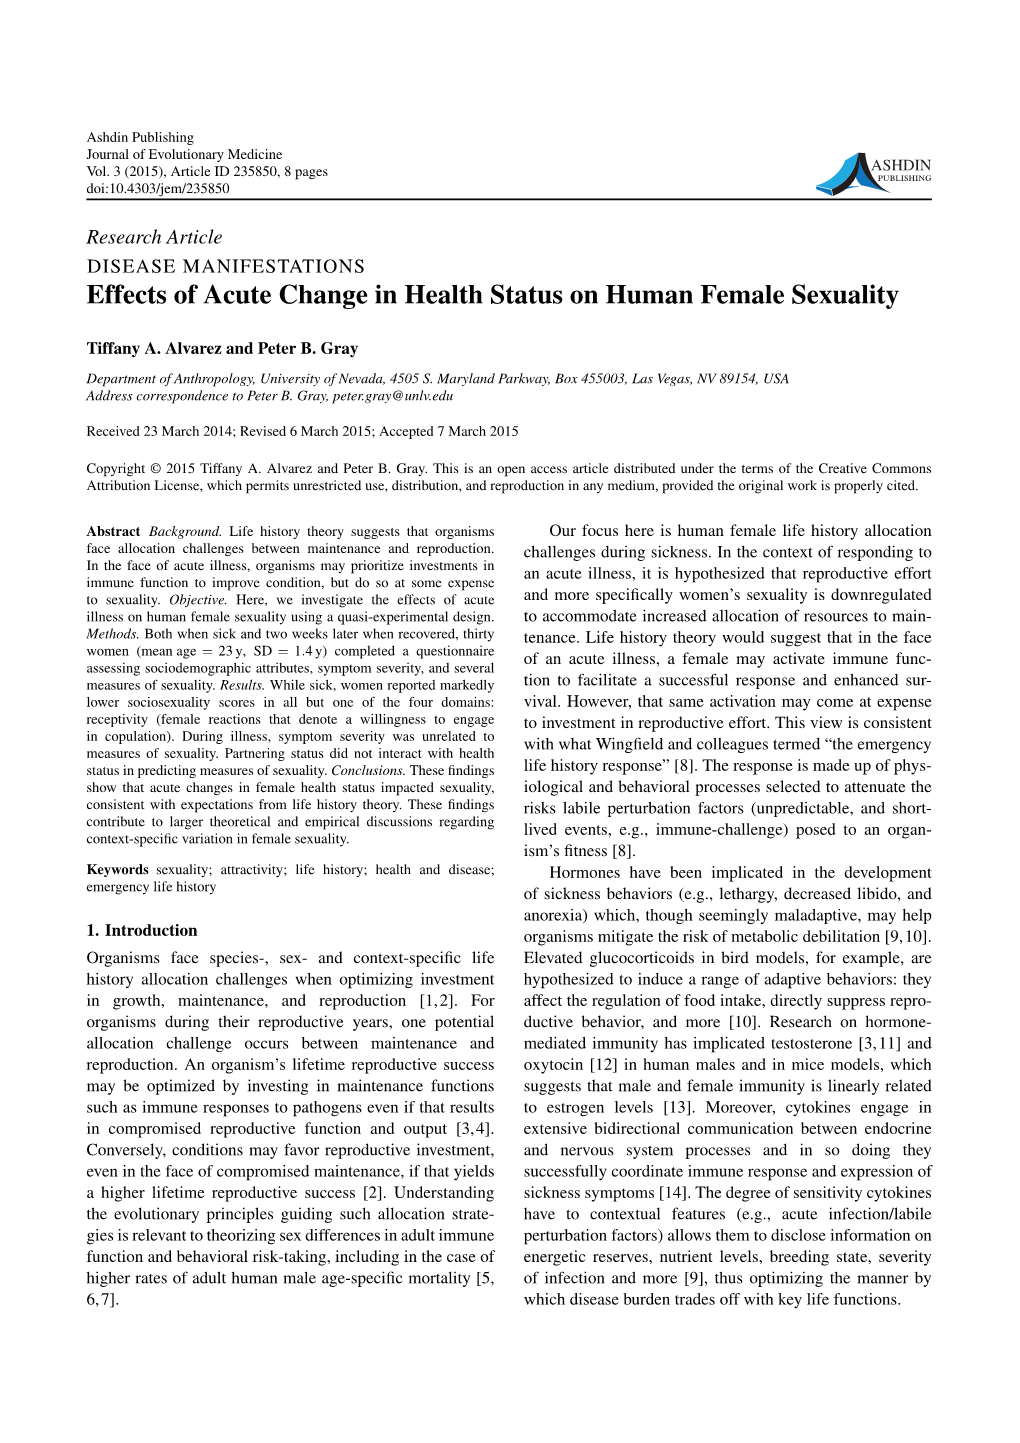 Effects of Acute Change in Health Status on Human Female Sexuality